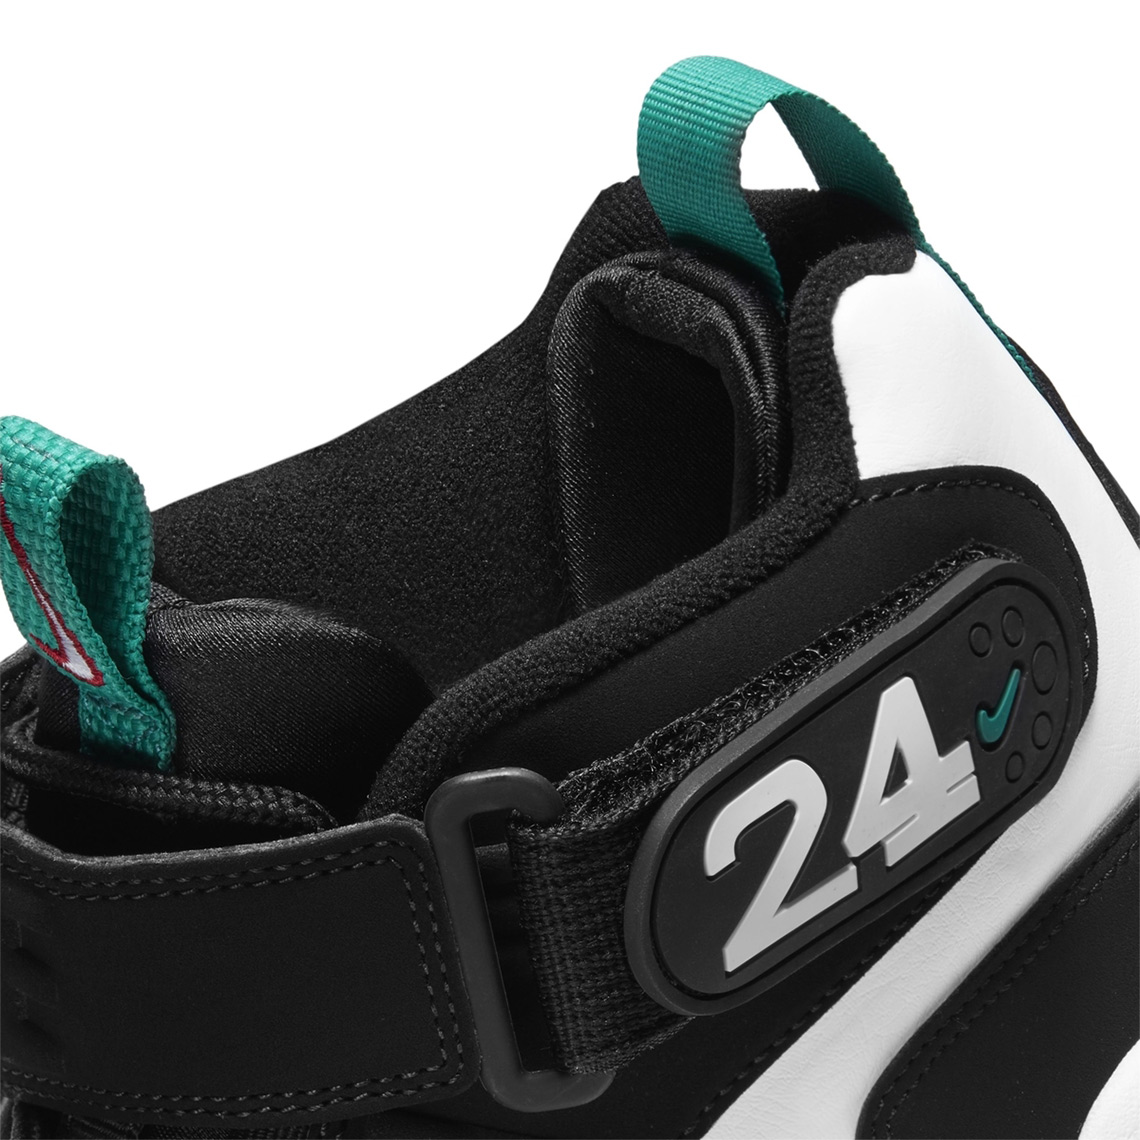 Nike low air griffey max 1 2021 release date 9